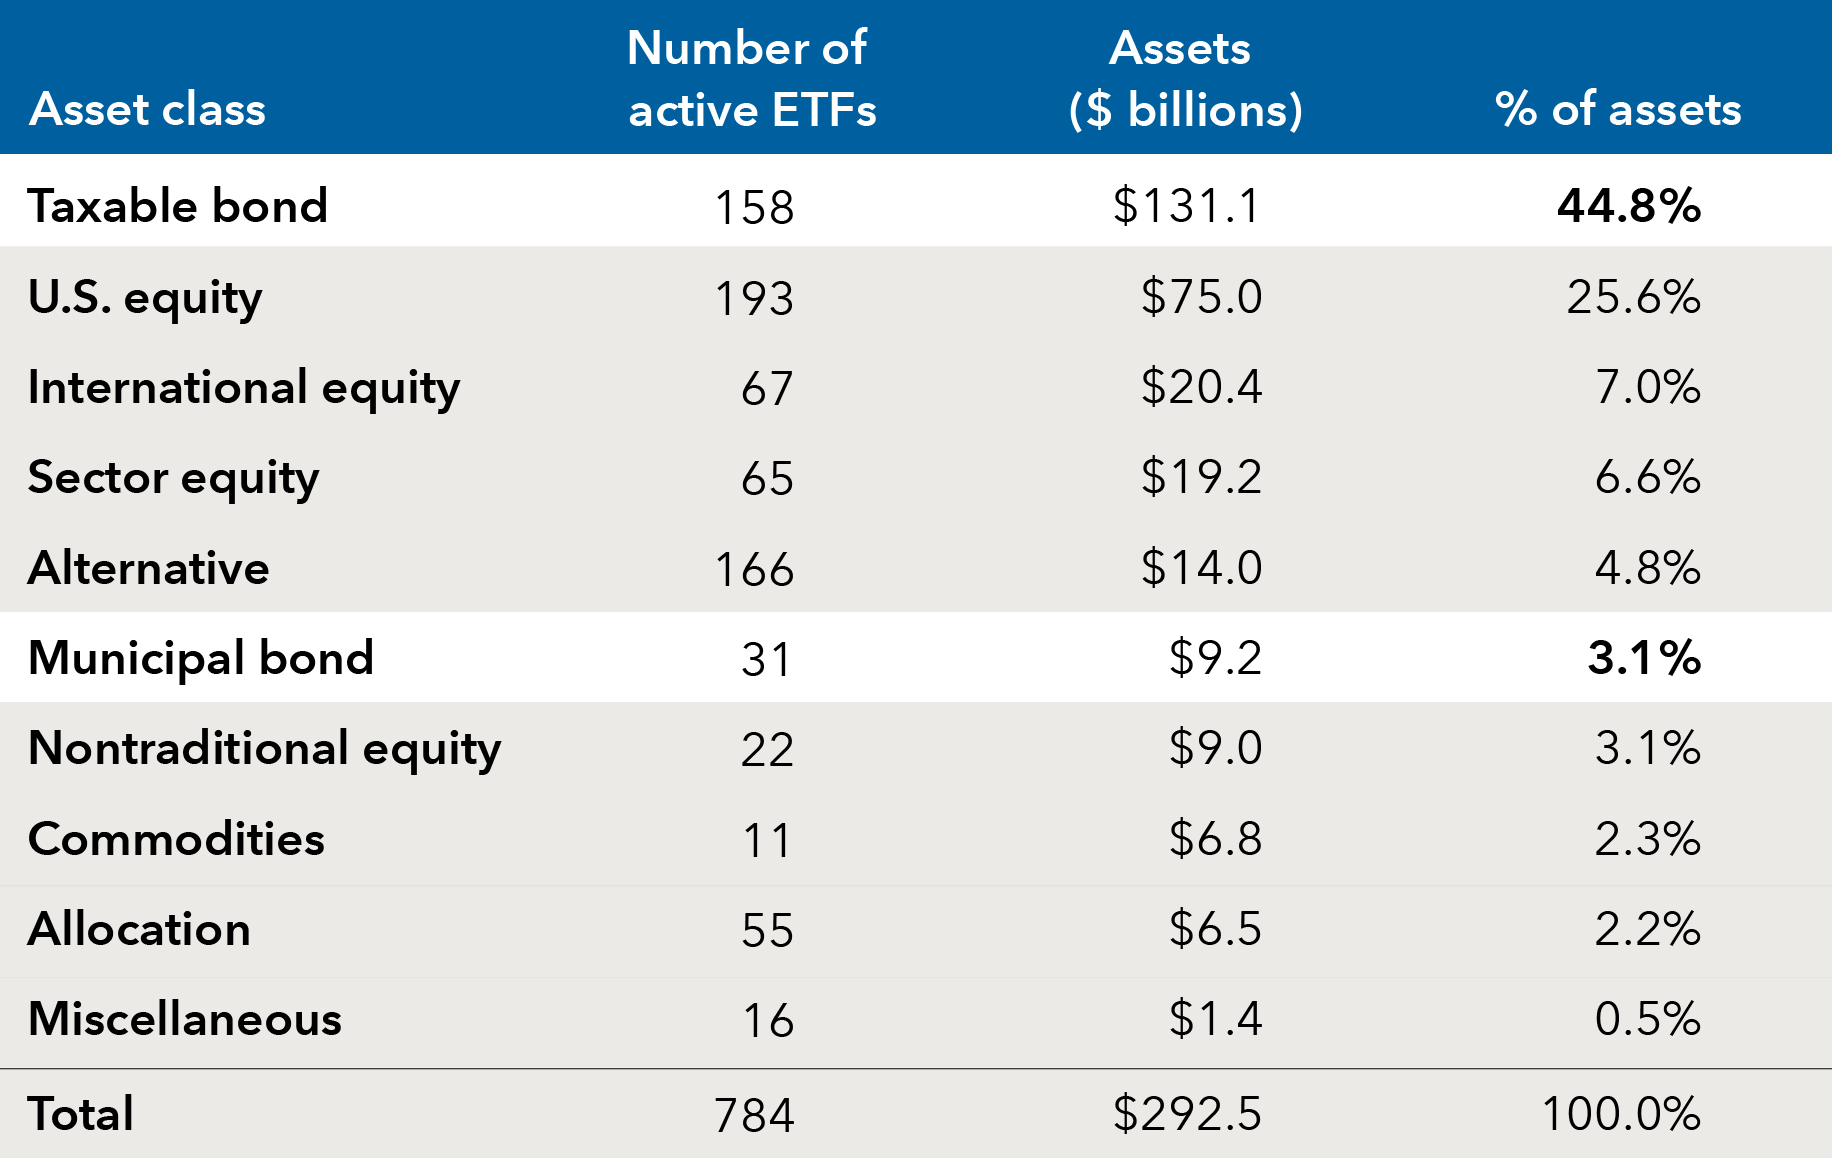 A table showing the breakdown of active ETFs by asset class. For taxable bond, there were 158 ETFs representing $131.1 billion, or 44.8% of assets. The data for other asset classes were as follows. U.S. equity: 193 ETFs, $75.0 billion, 25.6%. International equity: 67 ETFs, $20.4 billion, 7.0%. Sector equity: 65 ETFs, $19.2 billion, 6.6%. Alternative: 166 ETFs, $14.0 billion, 4.8%. Municipal bond: 31 ETFs, $9.2 billion, 3.1%. Nontraditional equity: 22 ETFs, $9.0 billion, 3.1%. Commodities: 11 ETFs, $6.8 billion, 2.3%. Allocation: 55 ETFs, $6.5 billion, 2.2%. Miscellaneous: 16 ETFs, $1.4 billion, 0.5%. The total across all asset classes was 784 ETFs, representing $292.5 billion.